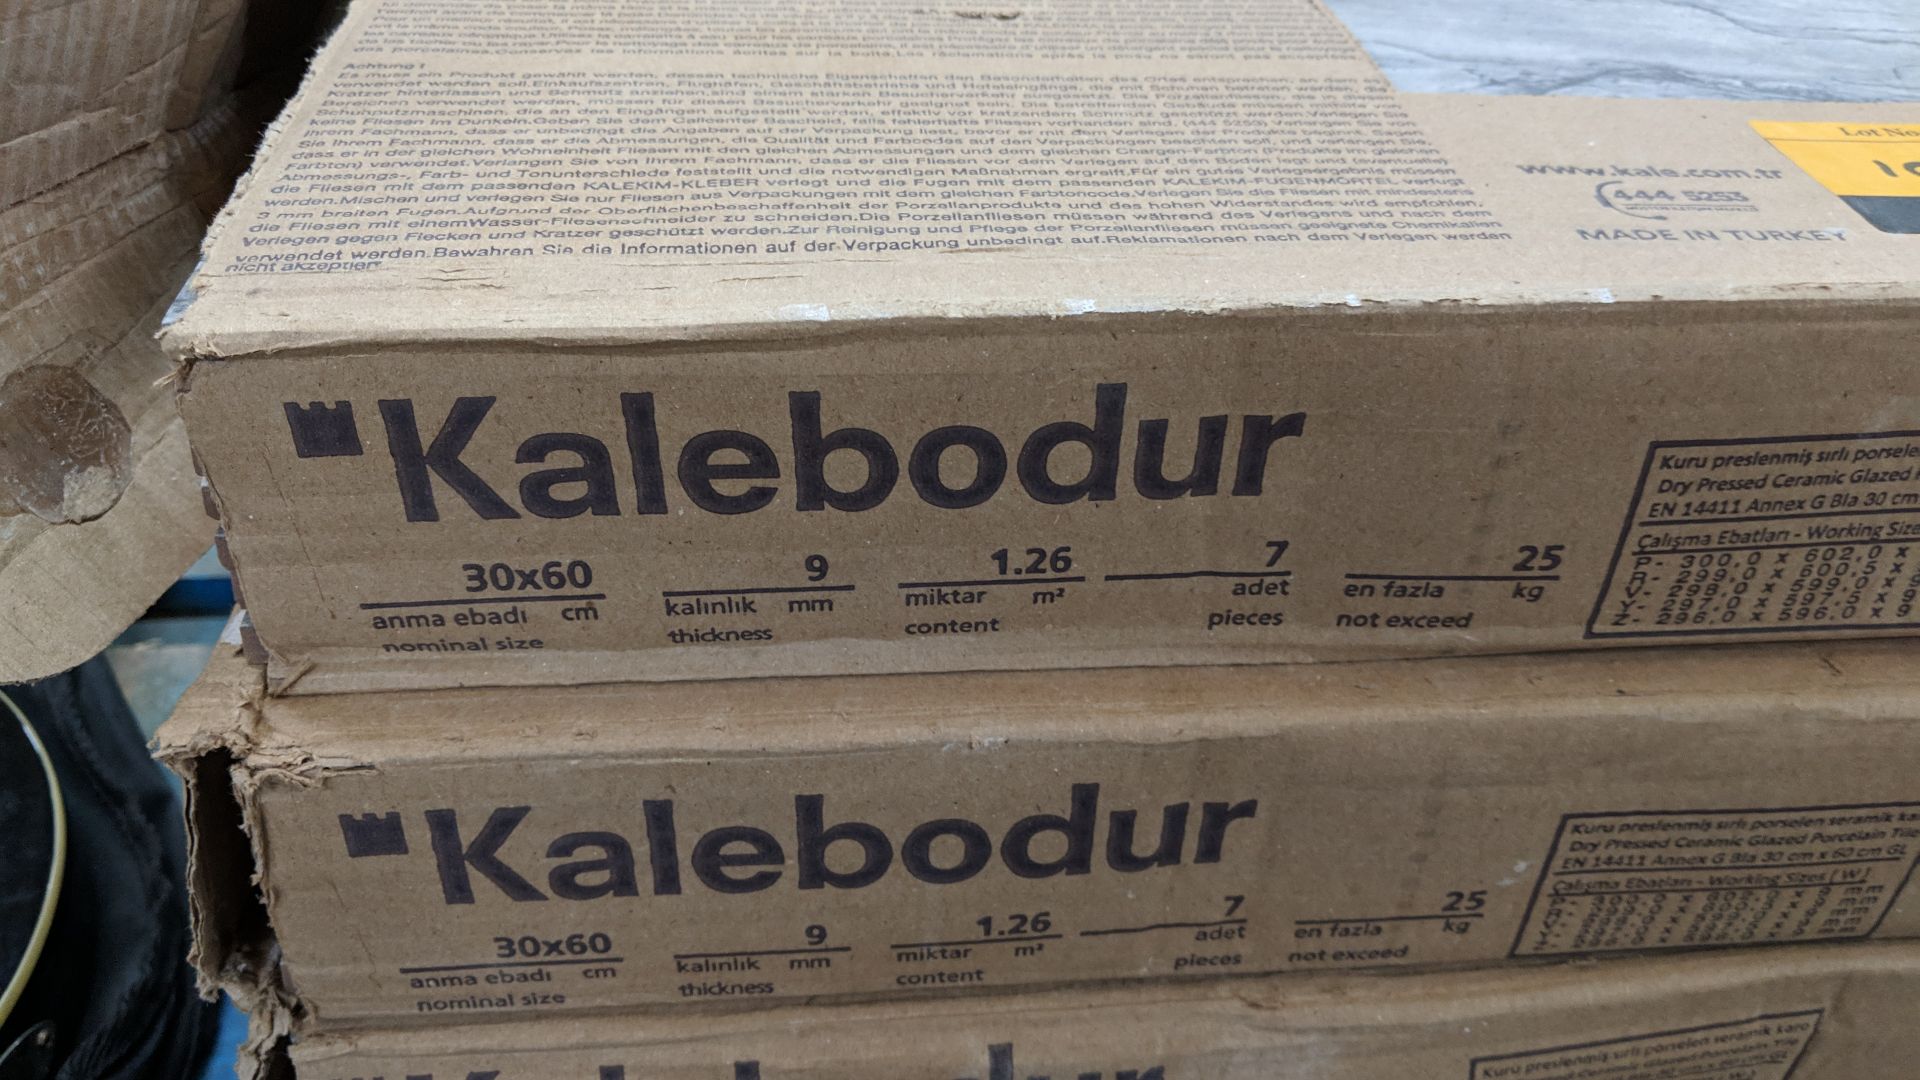 5 boxes of Kalebodur high quality floor/wall tiles, each box containing approx. 1.26sq m of tiles - Image 4 of 6